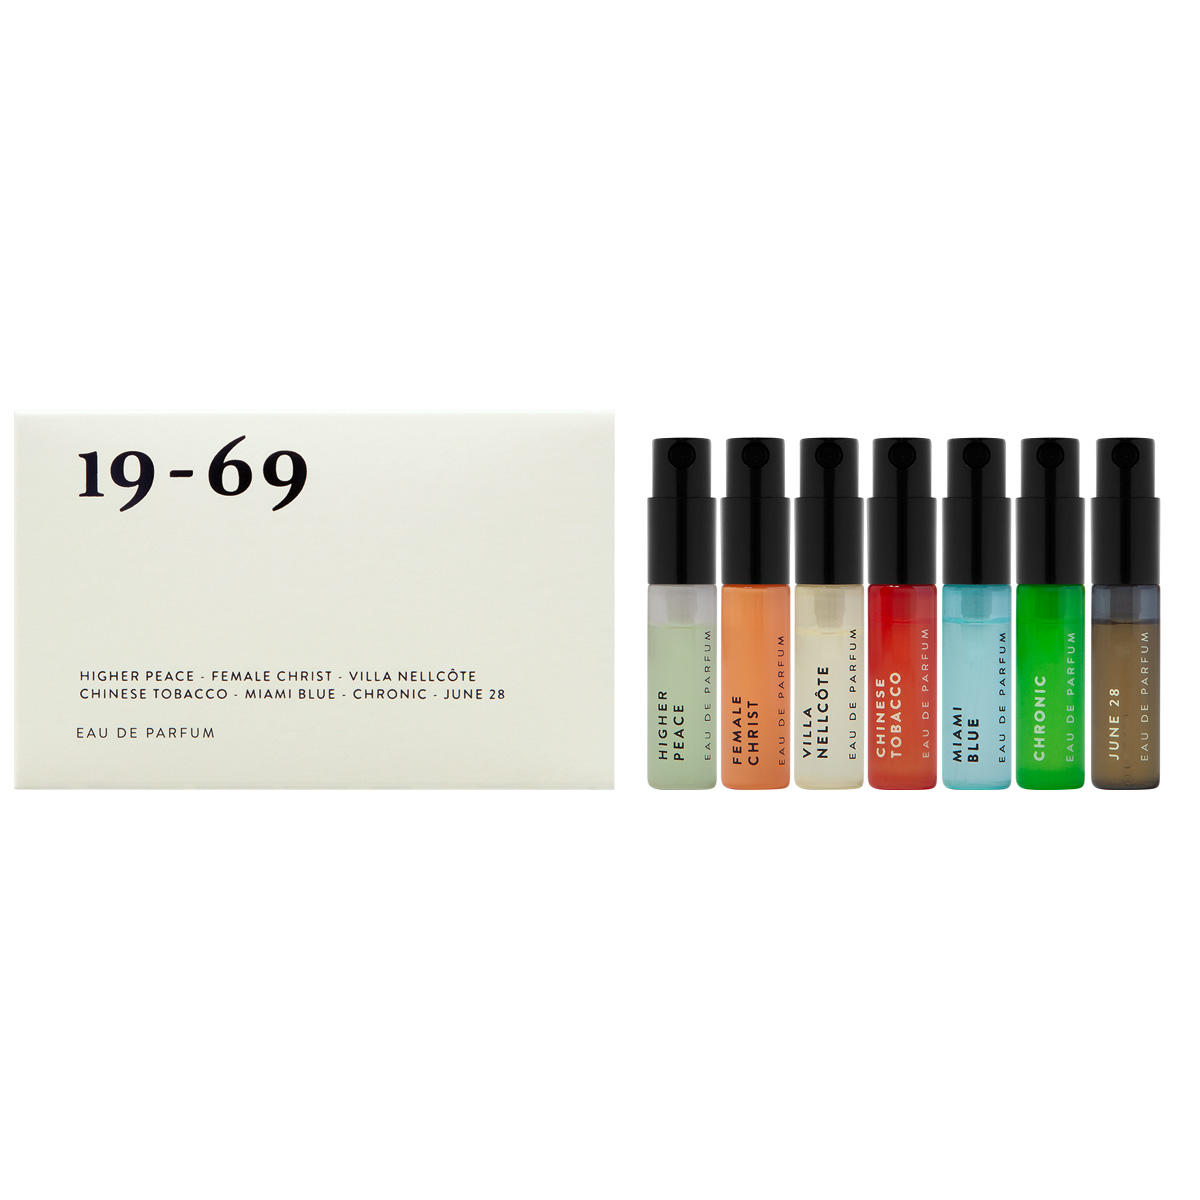 19-69 The Discovery Set 2 7 x 2,5 ml - 1